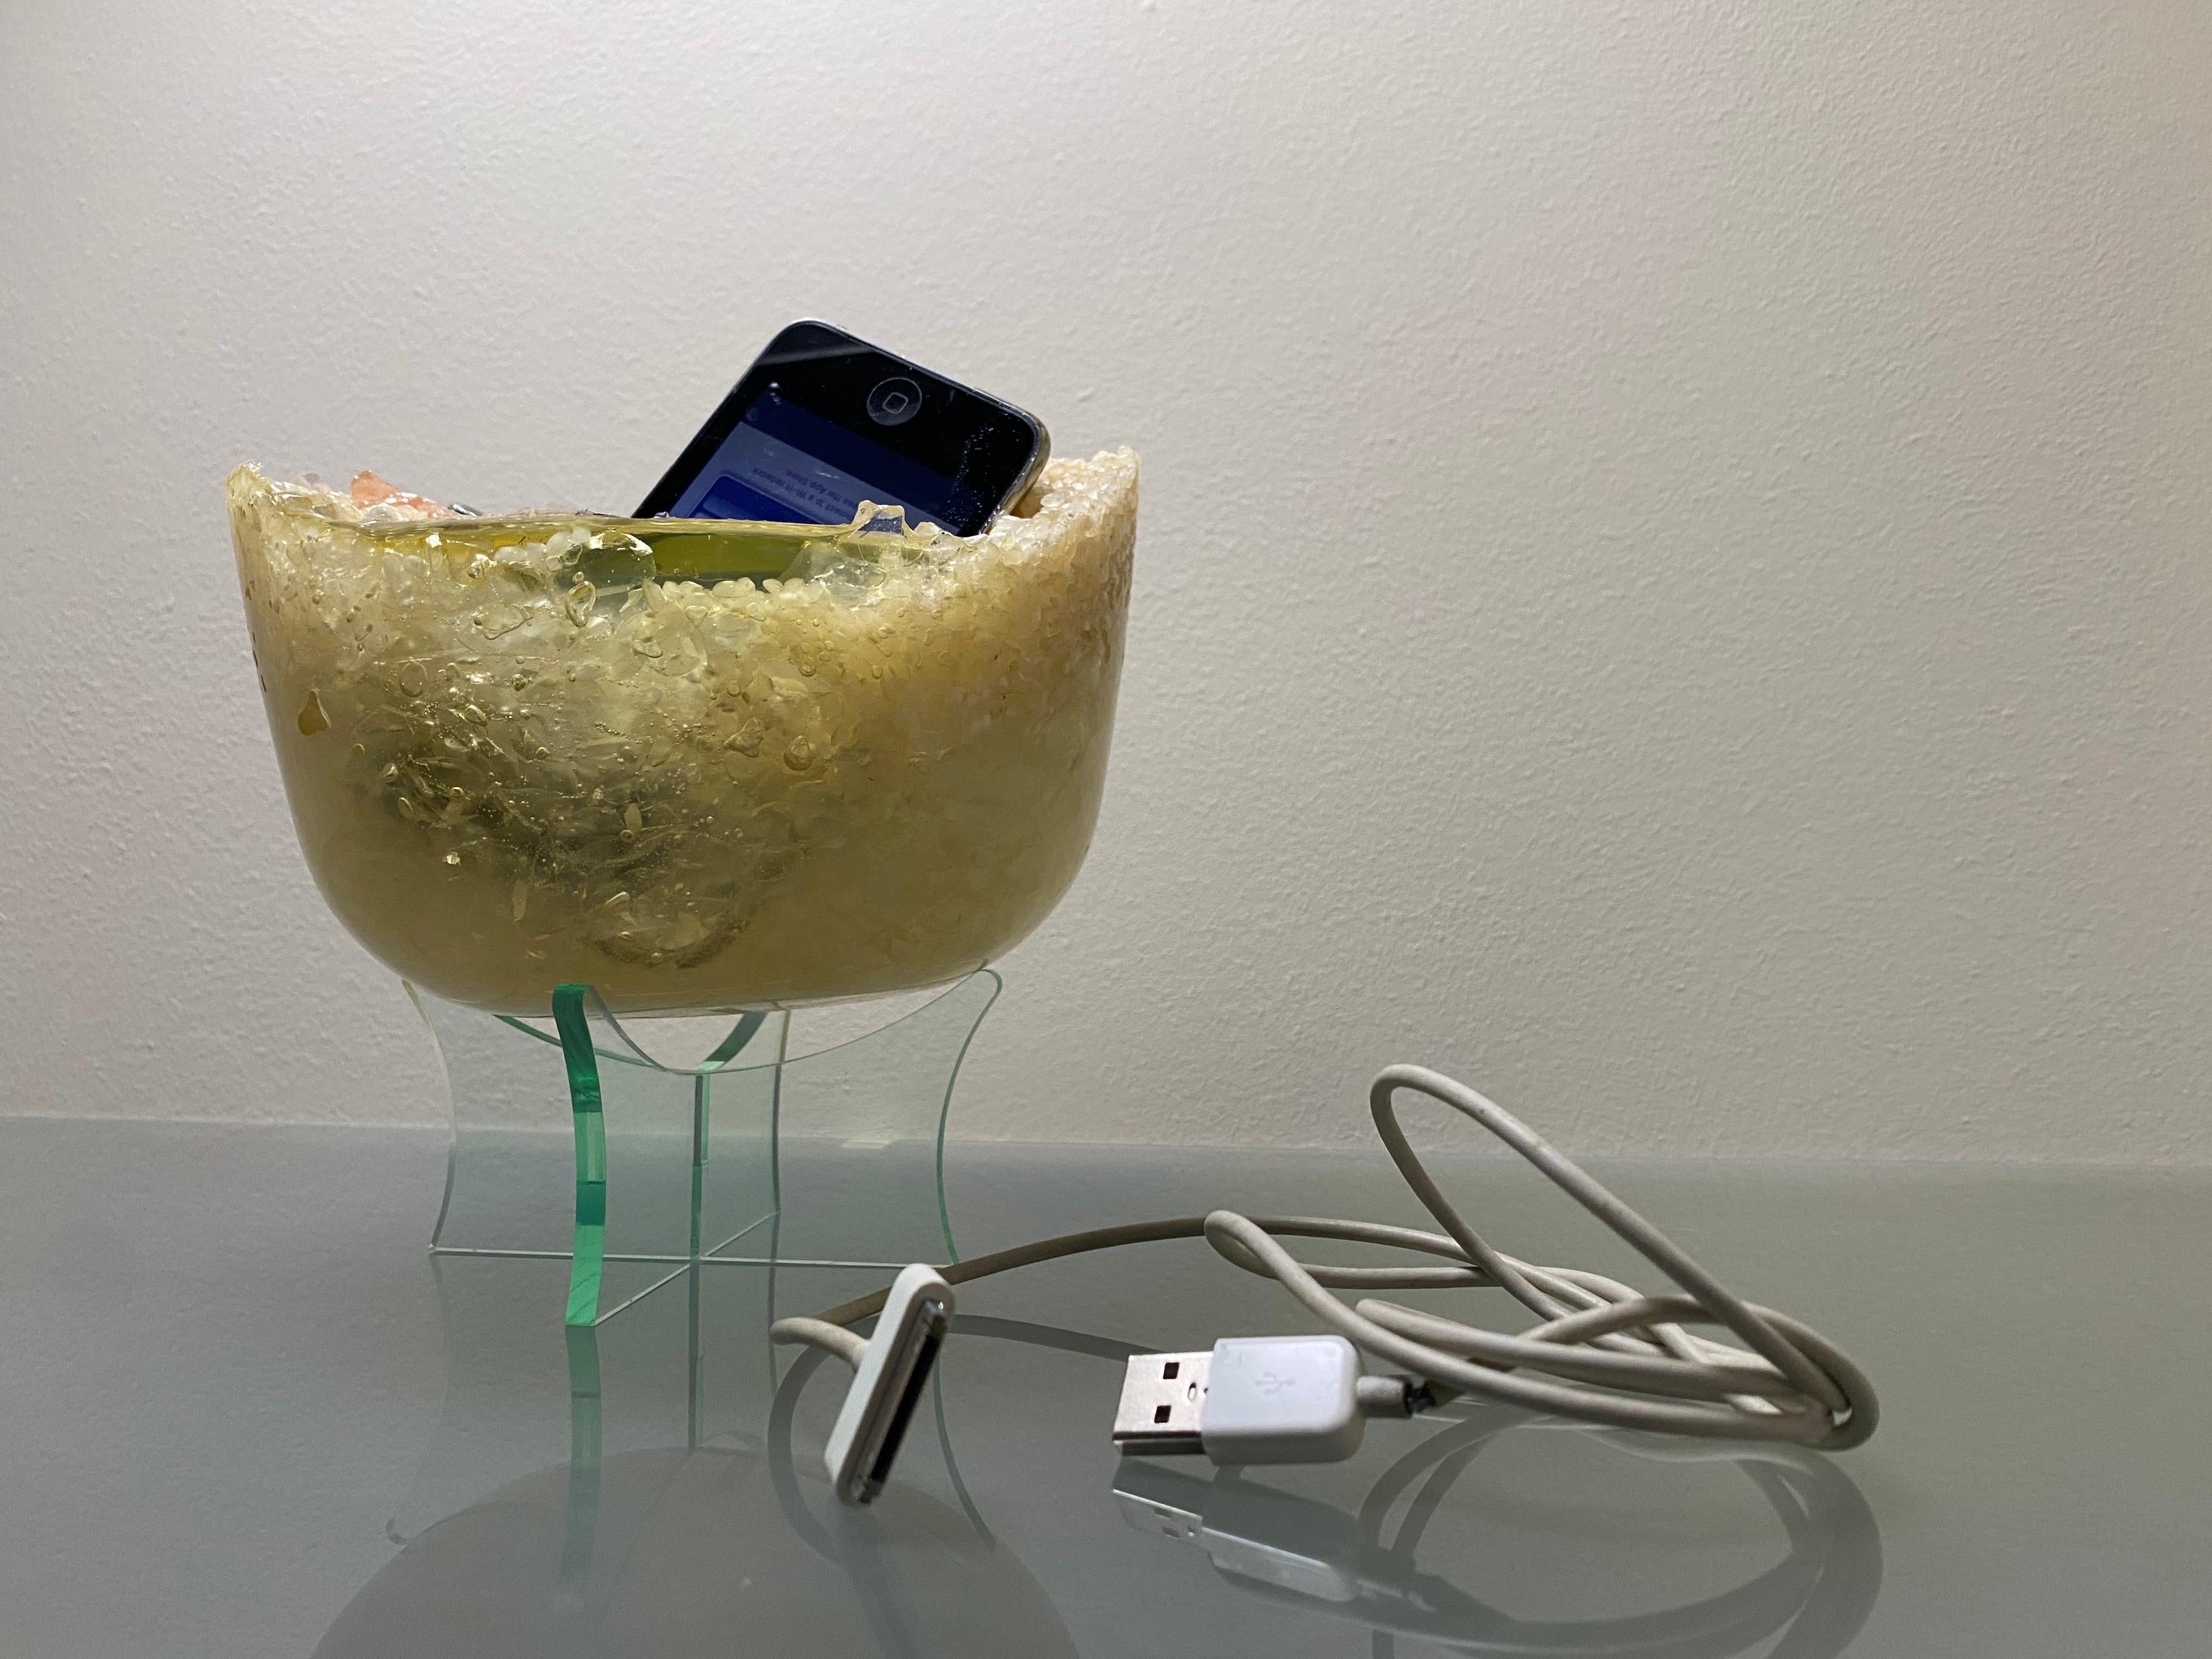 Banquet IV-Time Capsule-ipod2008-Resin Casting-UK Awarded Conceptual Artist  For Sale 8